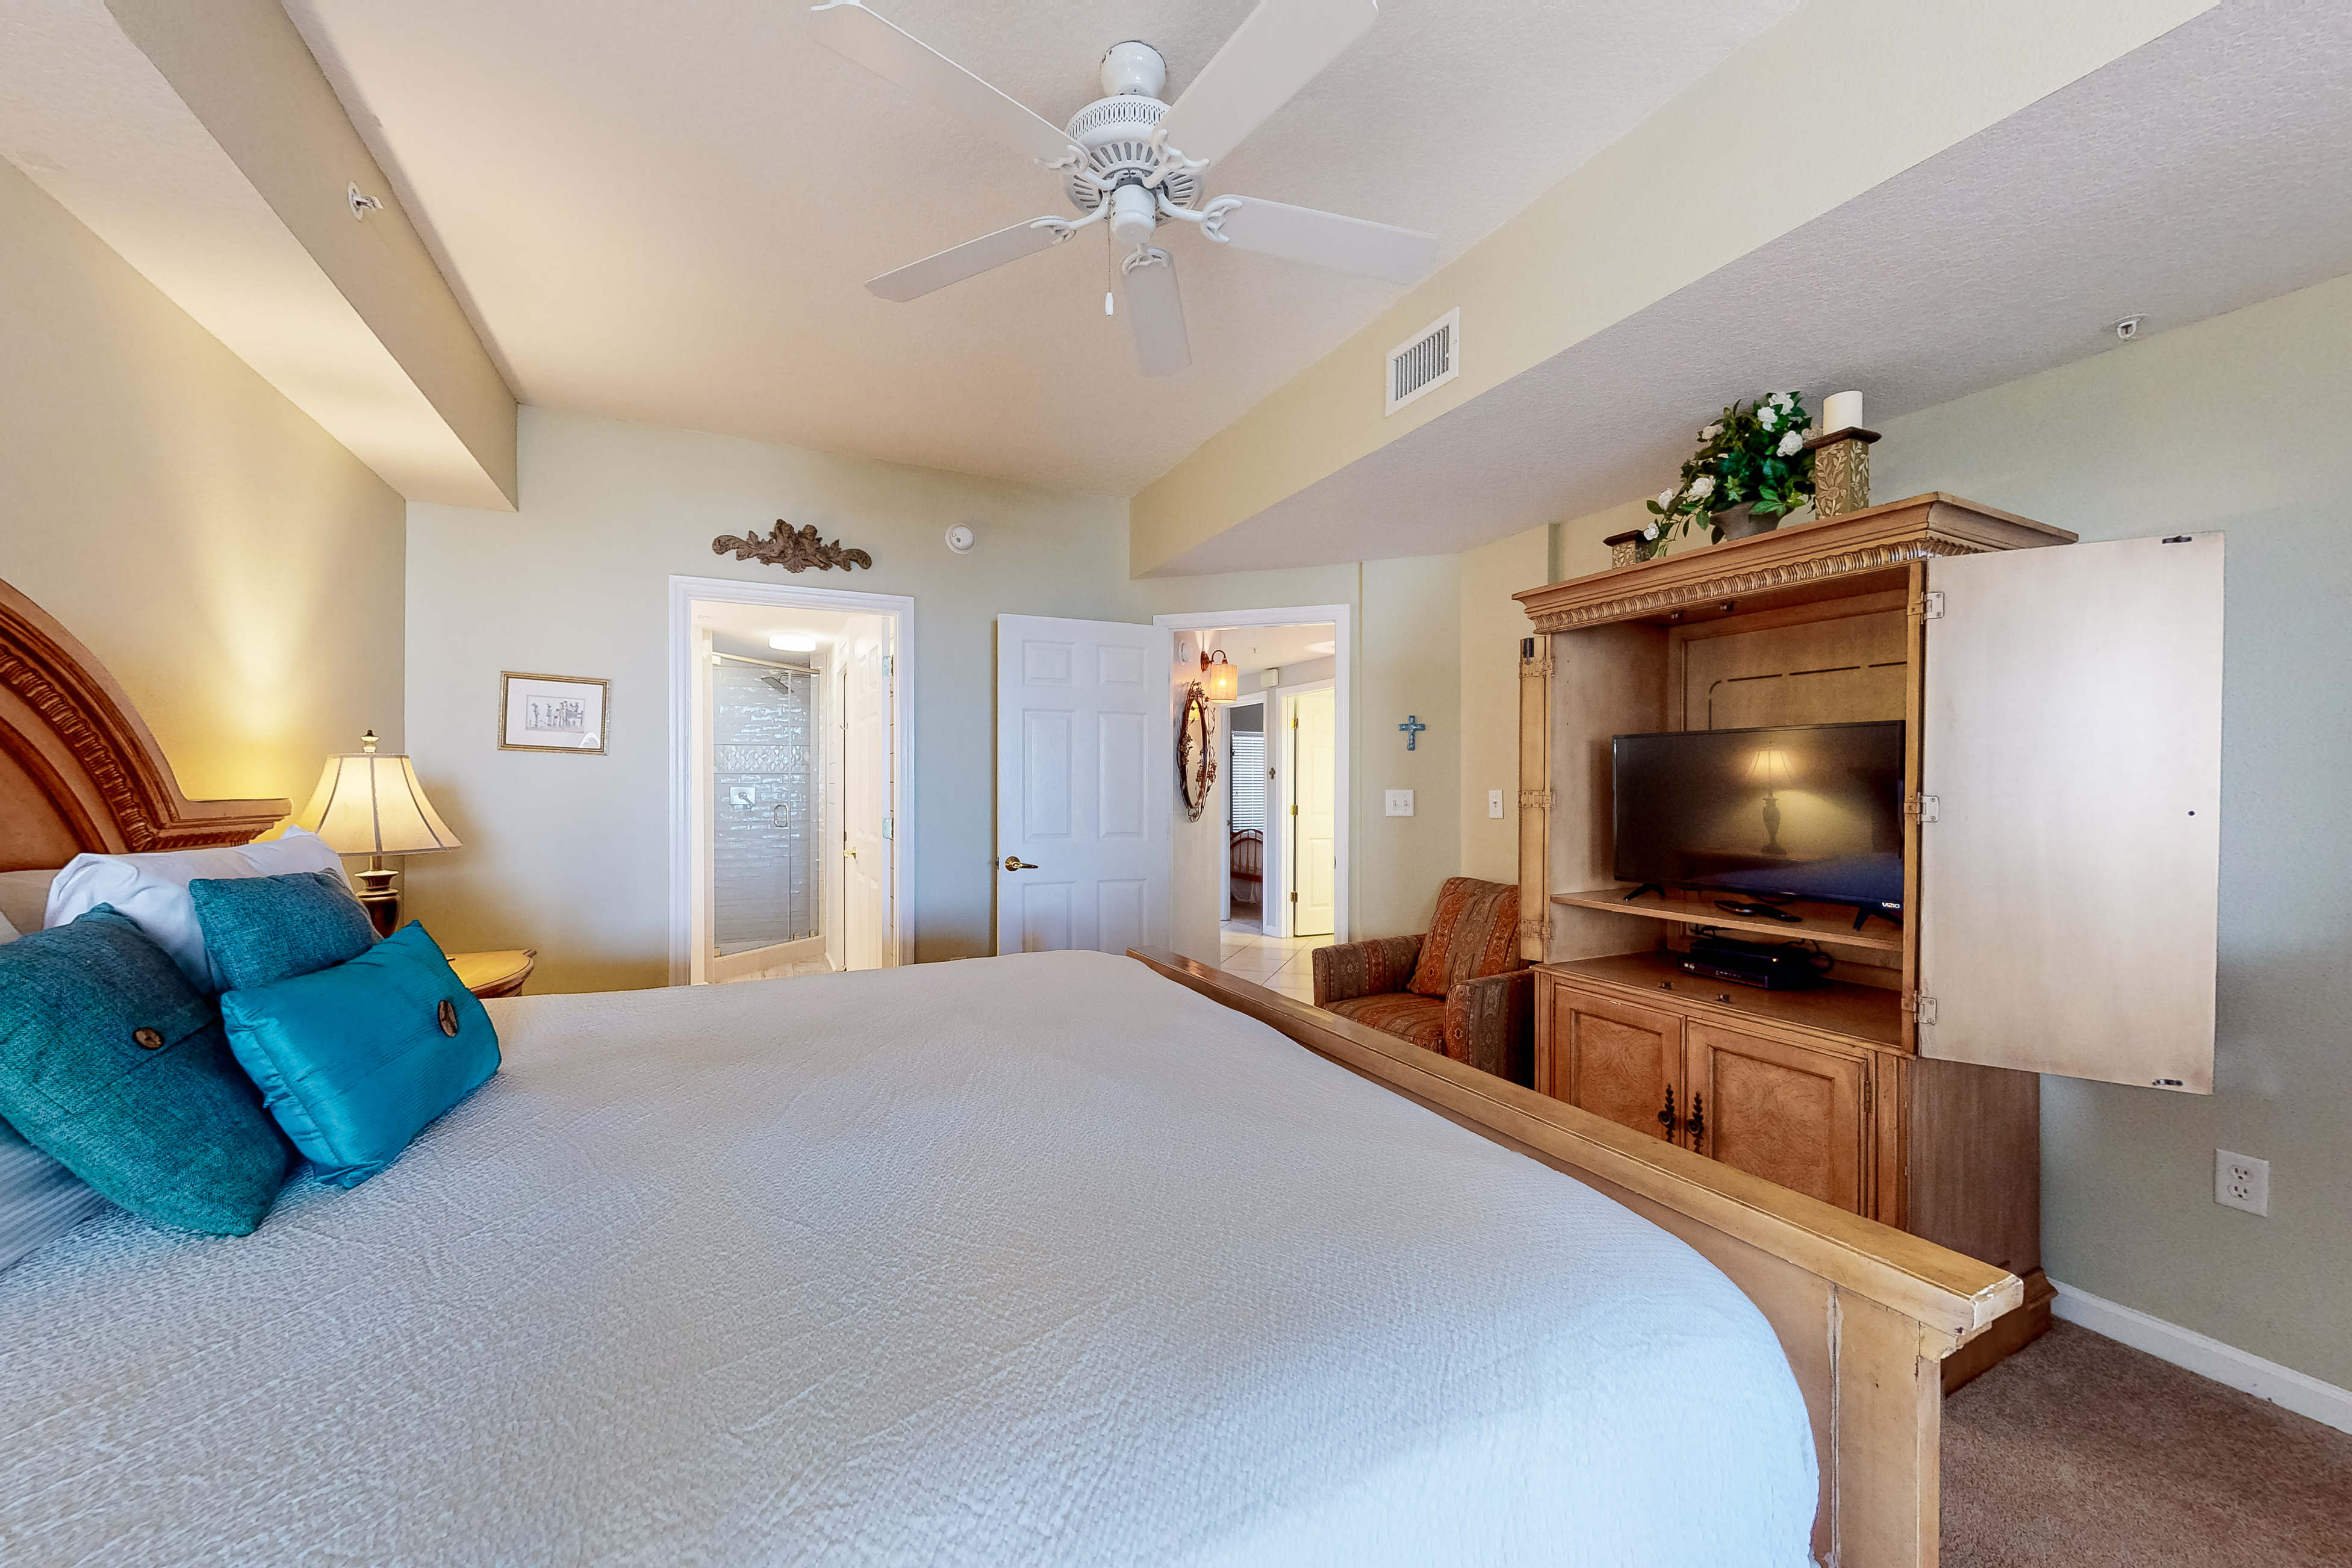 Dunes of Seagrove B103 Condo rental in Dunes of Seagrove in Highway 30-A Florida - #13